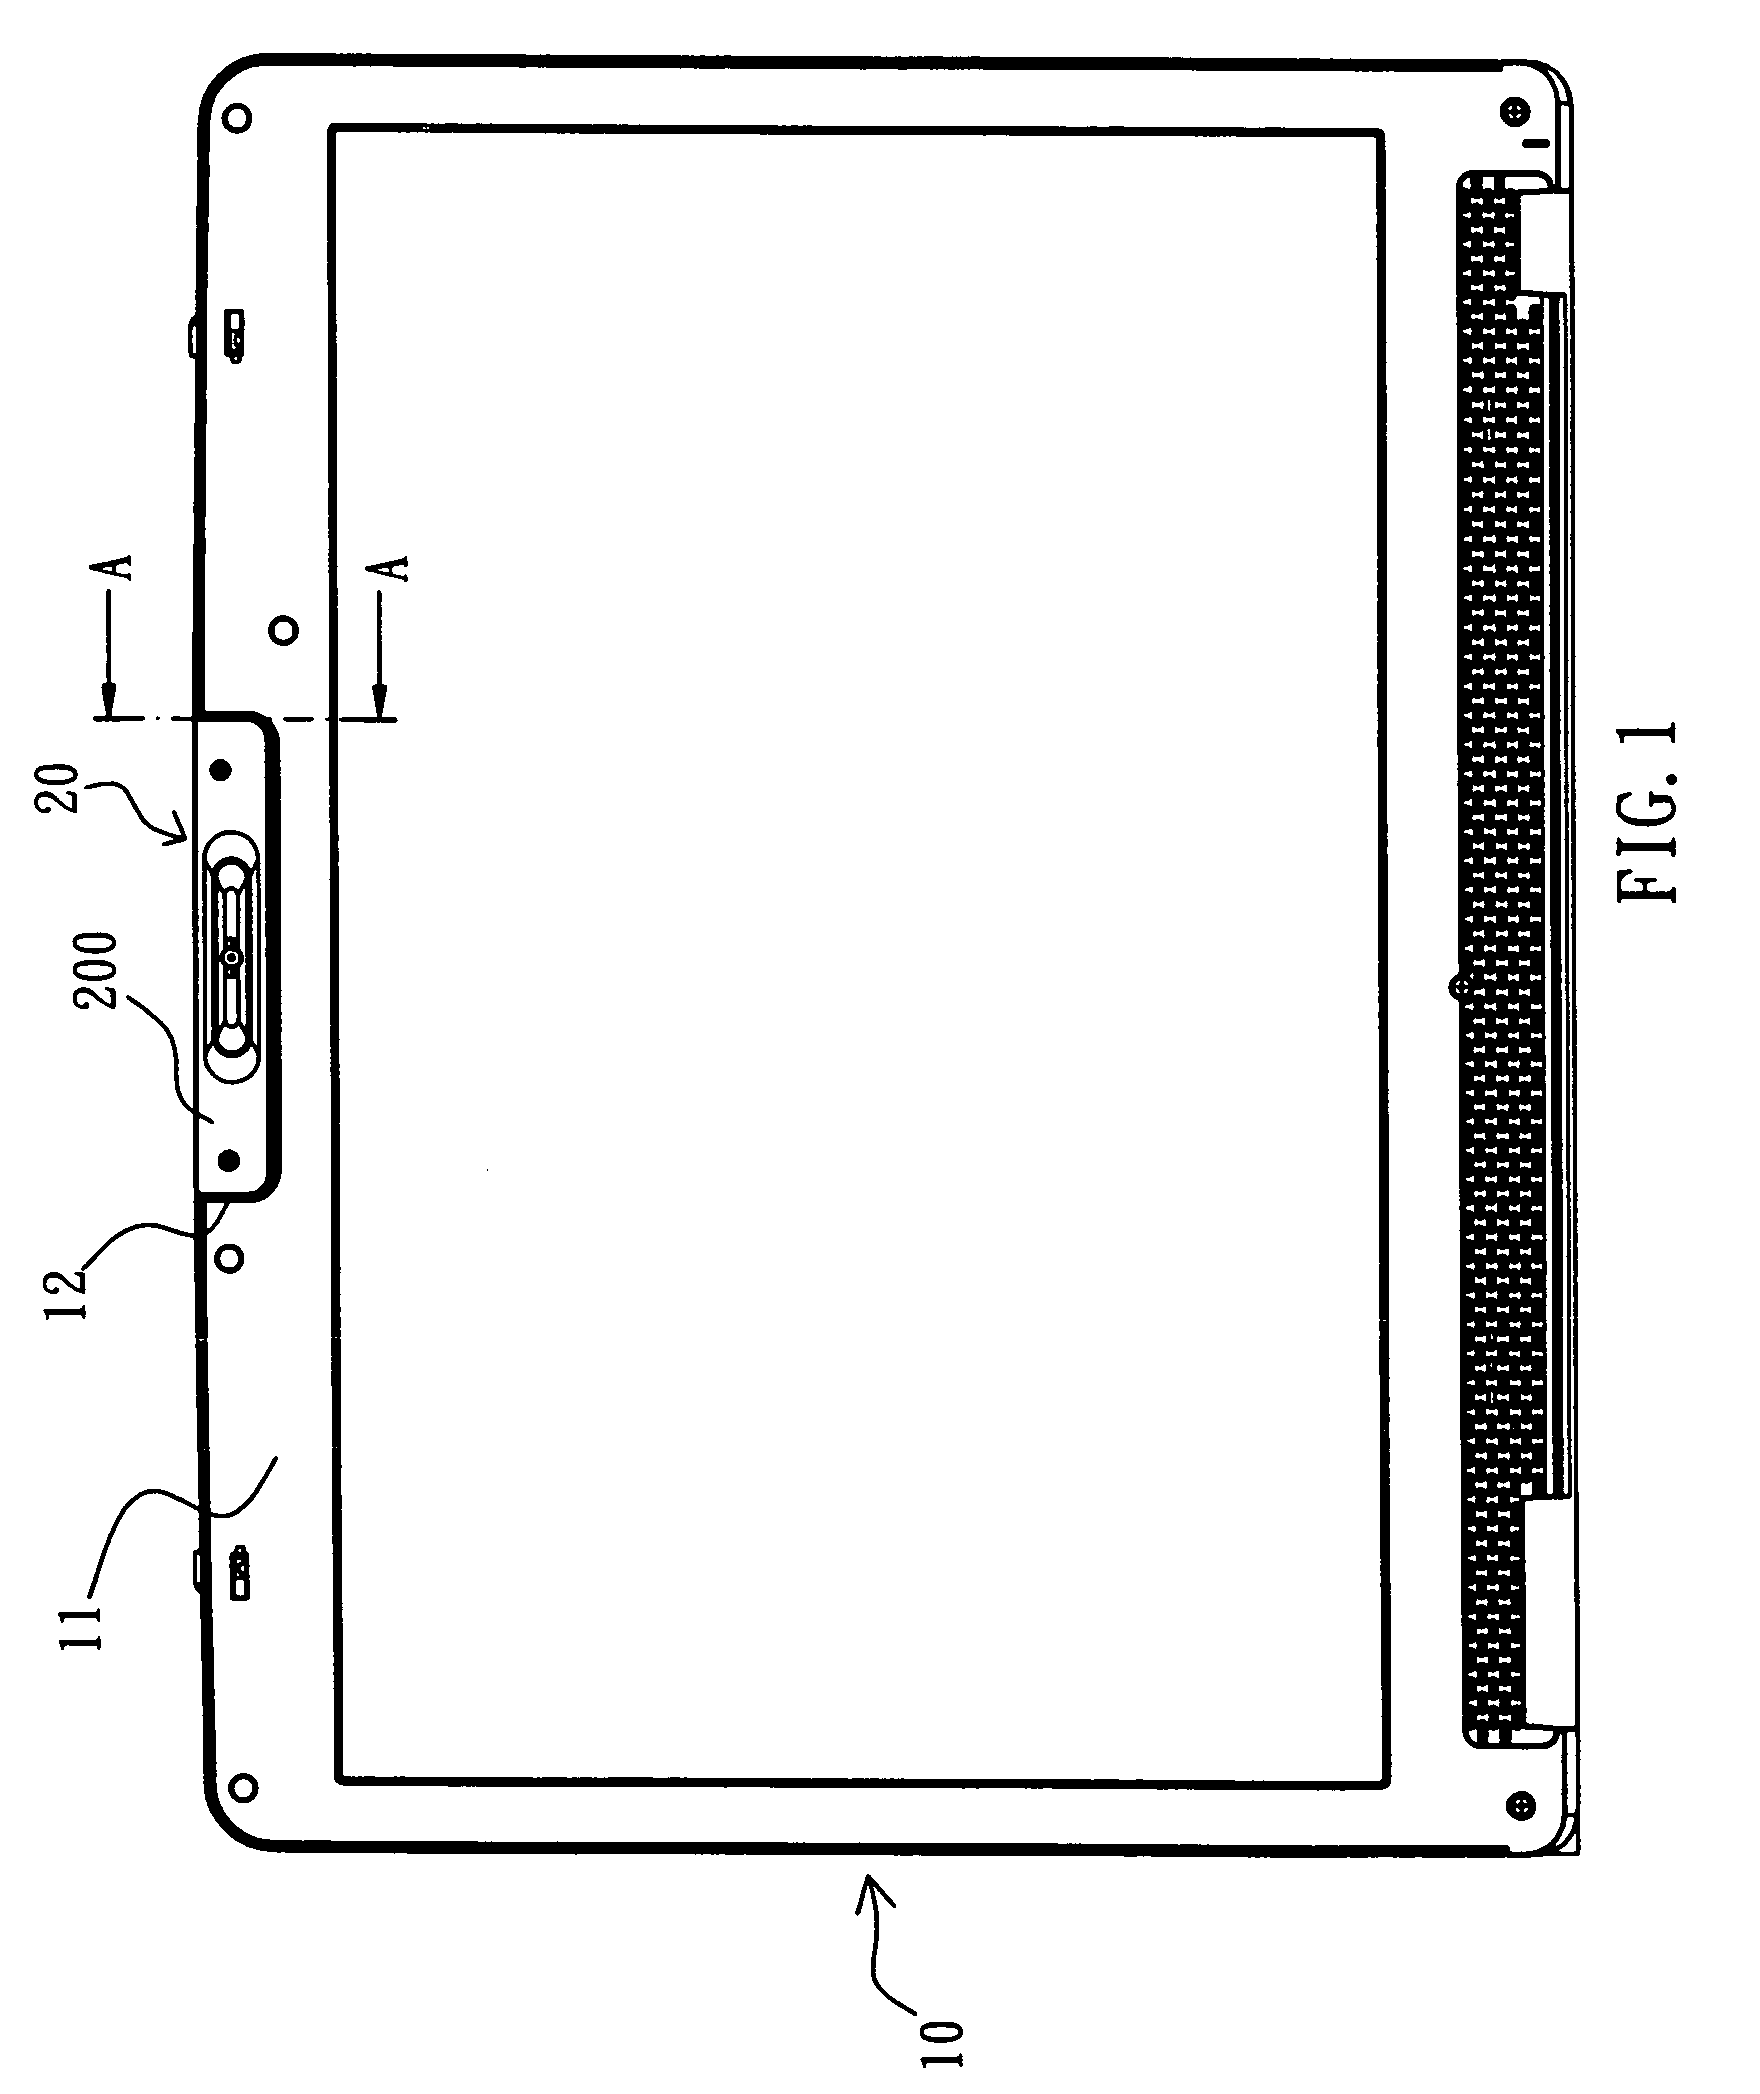 Rotational casing associated with an electronic device